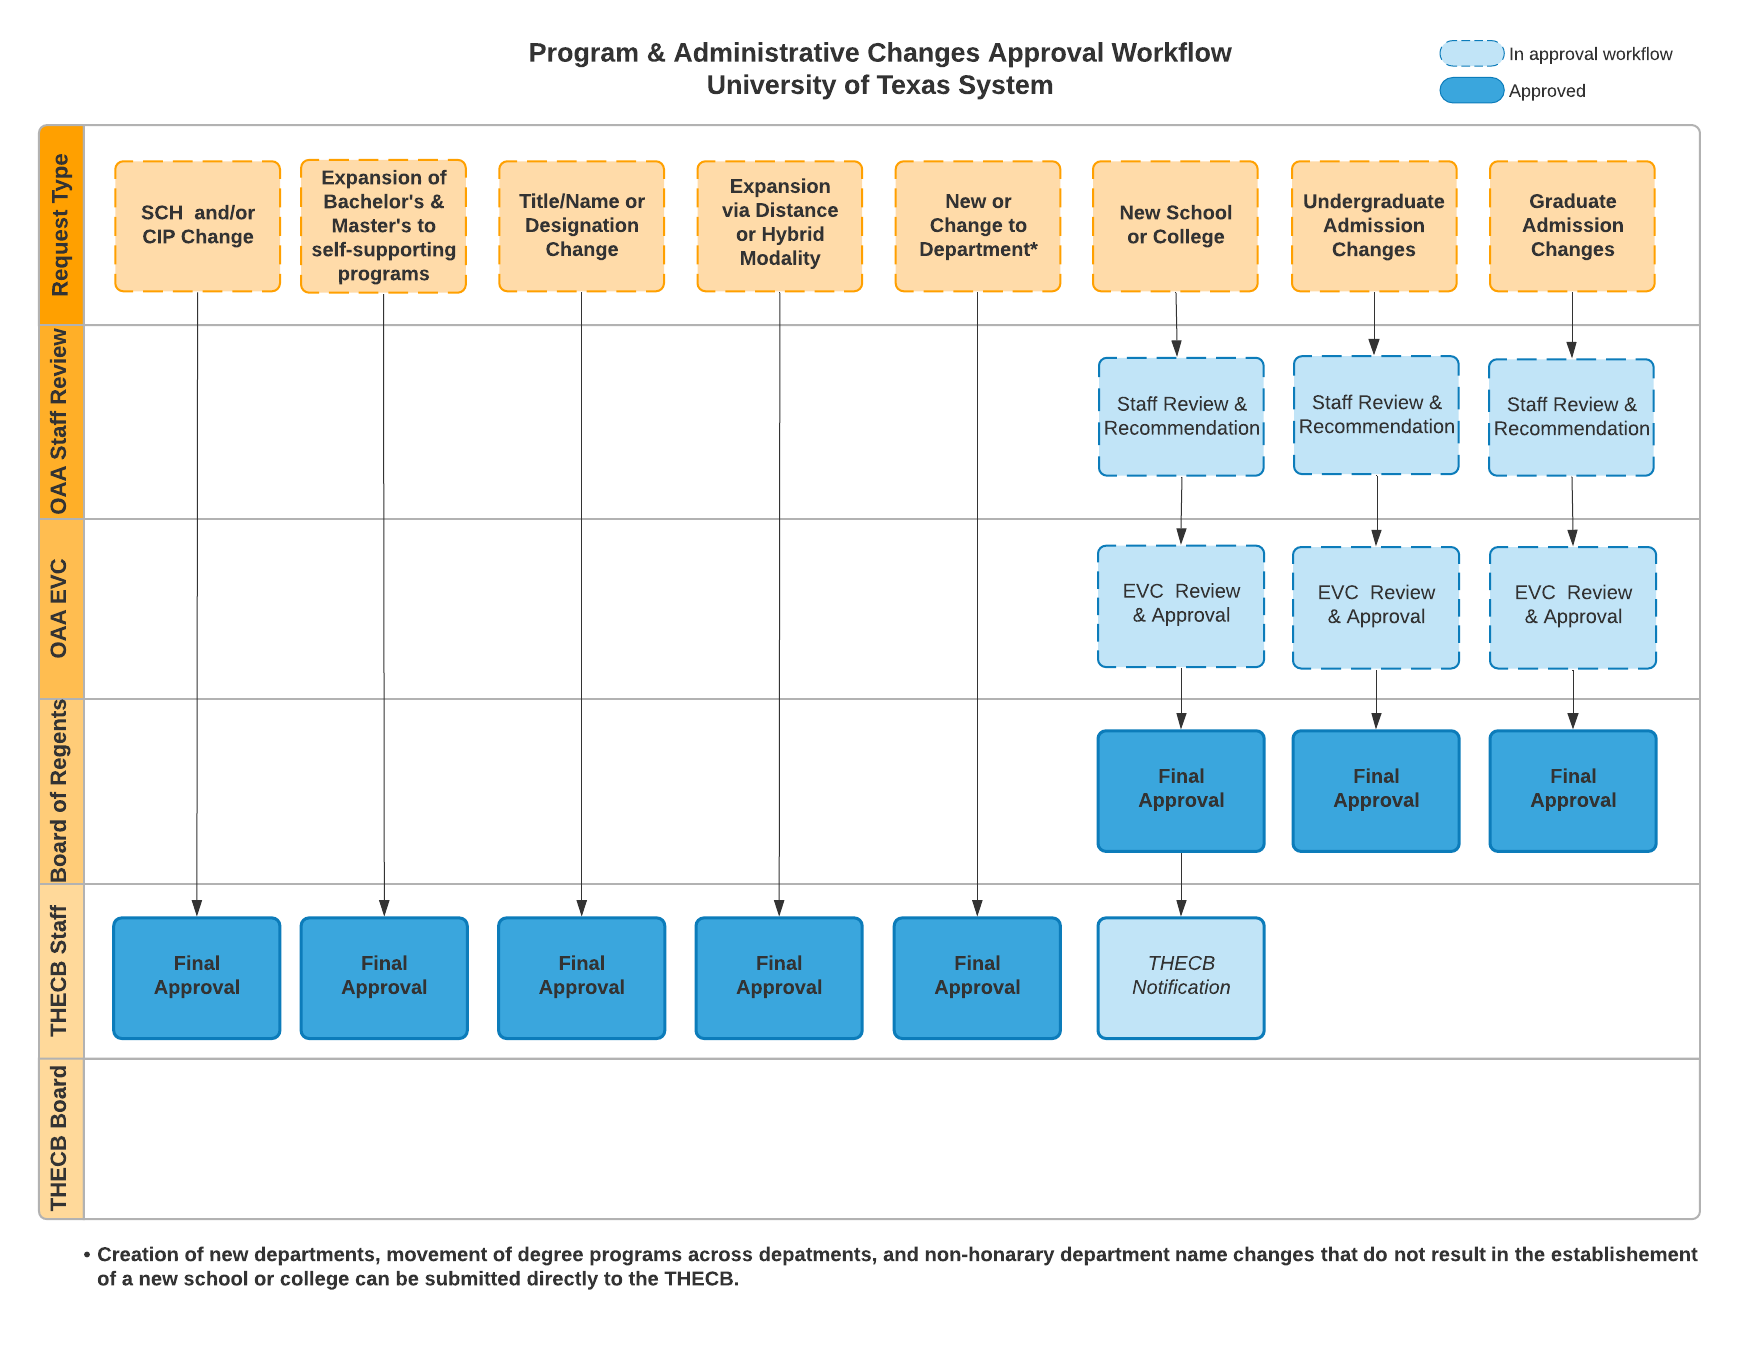 UT Degree Program Changes Approval Workflow Image 12.1.21